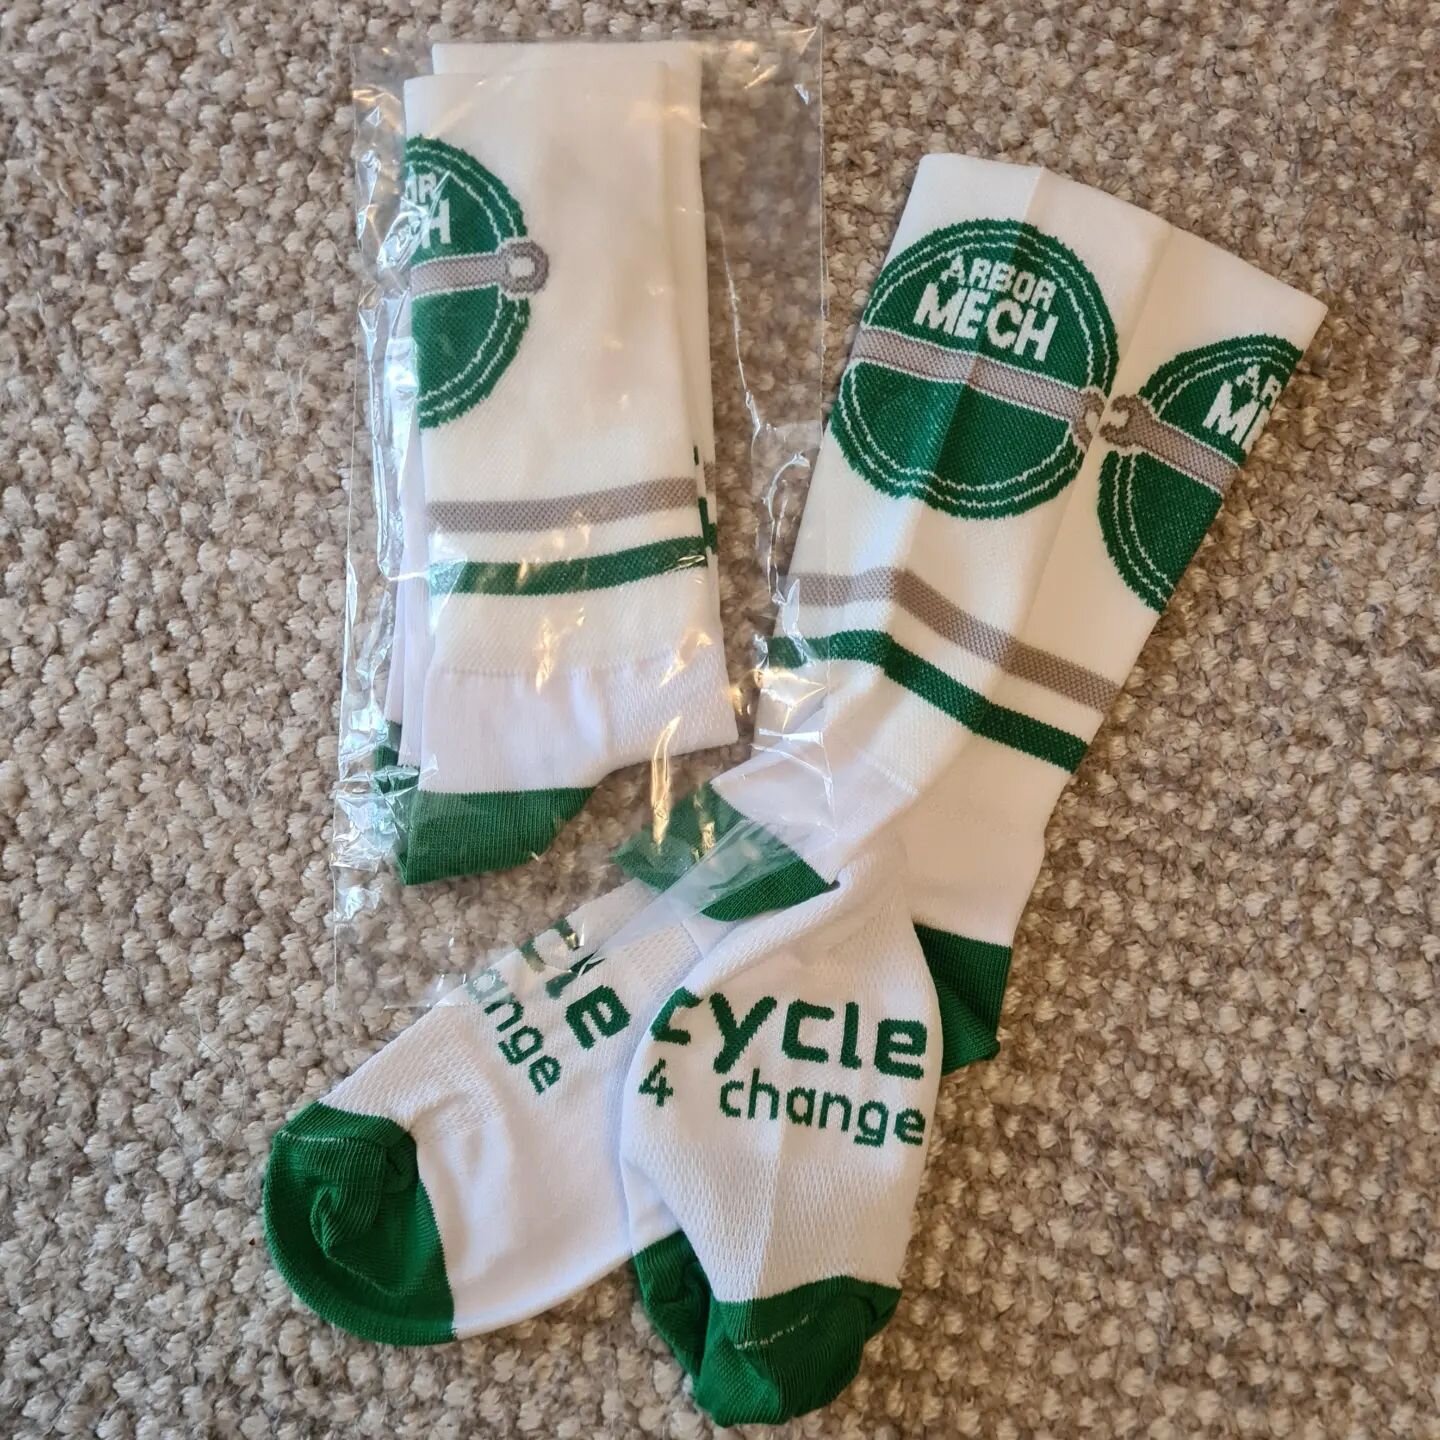 YES! @arbor_mech branded socks 🧦 one of our amazing supporters for 2023 have arrived and have come up a treat thanks to @sokhyte 😍

Looking forward to seeing the riders rock these while turning the pedals in a few week on the Sunny Coast. 

We'll b